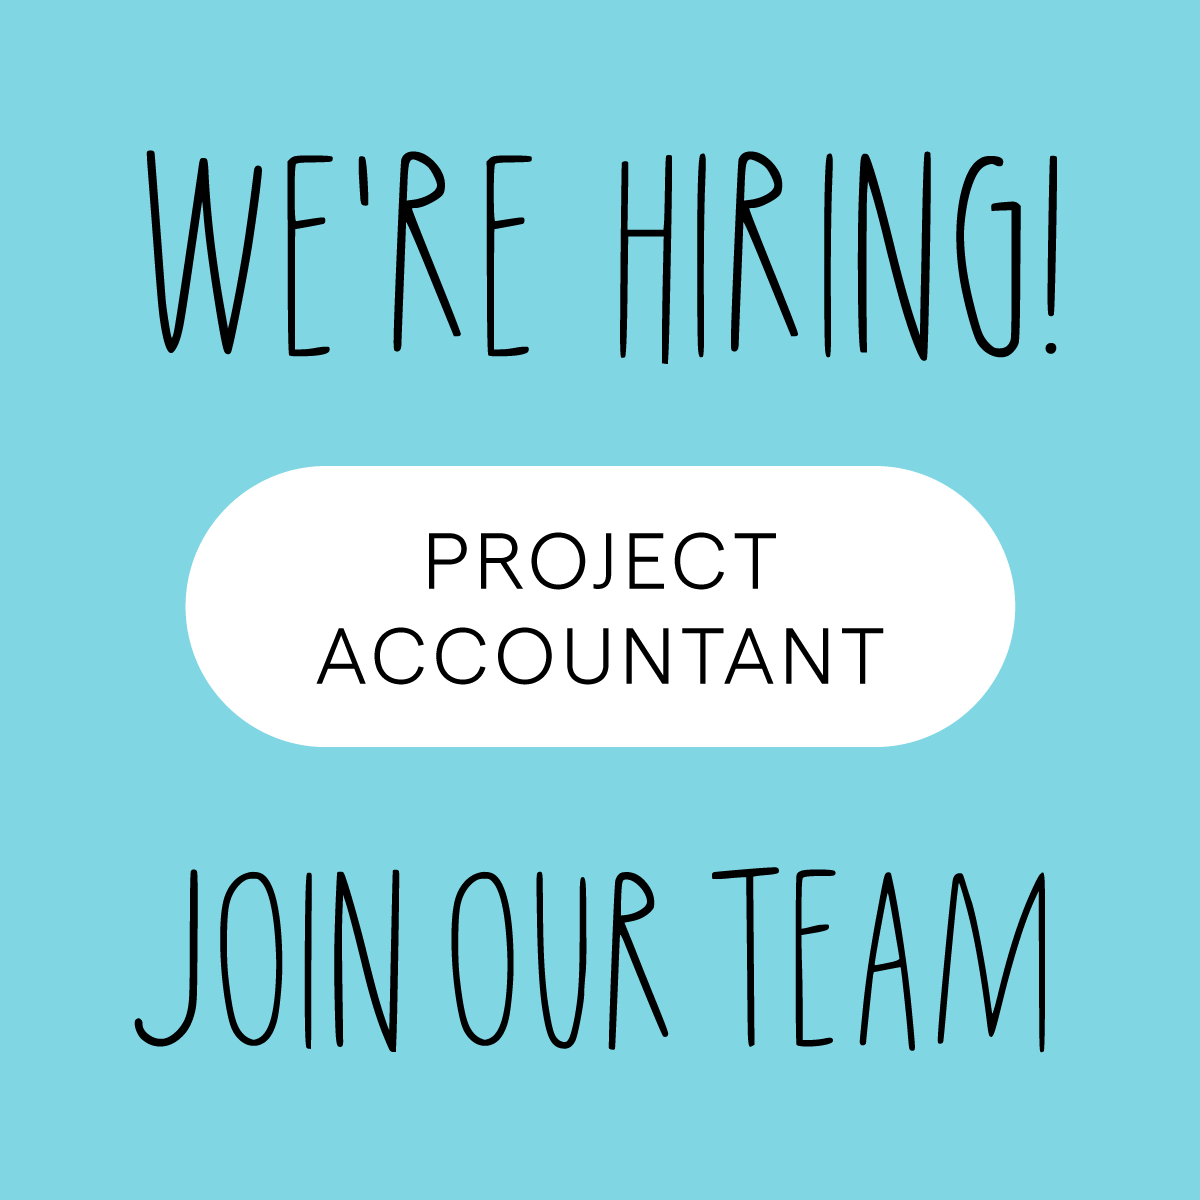 We're hiring a part-time Project Accountant! We're looking for strong technical accounting knowledge, experience in a project/cost-accounting environment, and familiarity with grant & project acquittals. Apply before November 8, 5pm AEDT here: buff.ly/2Q63vWh